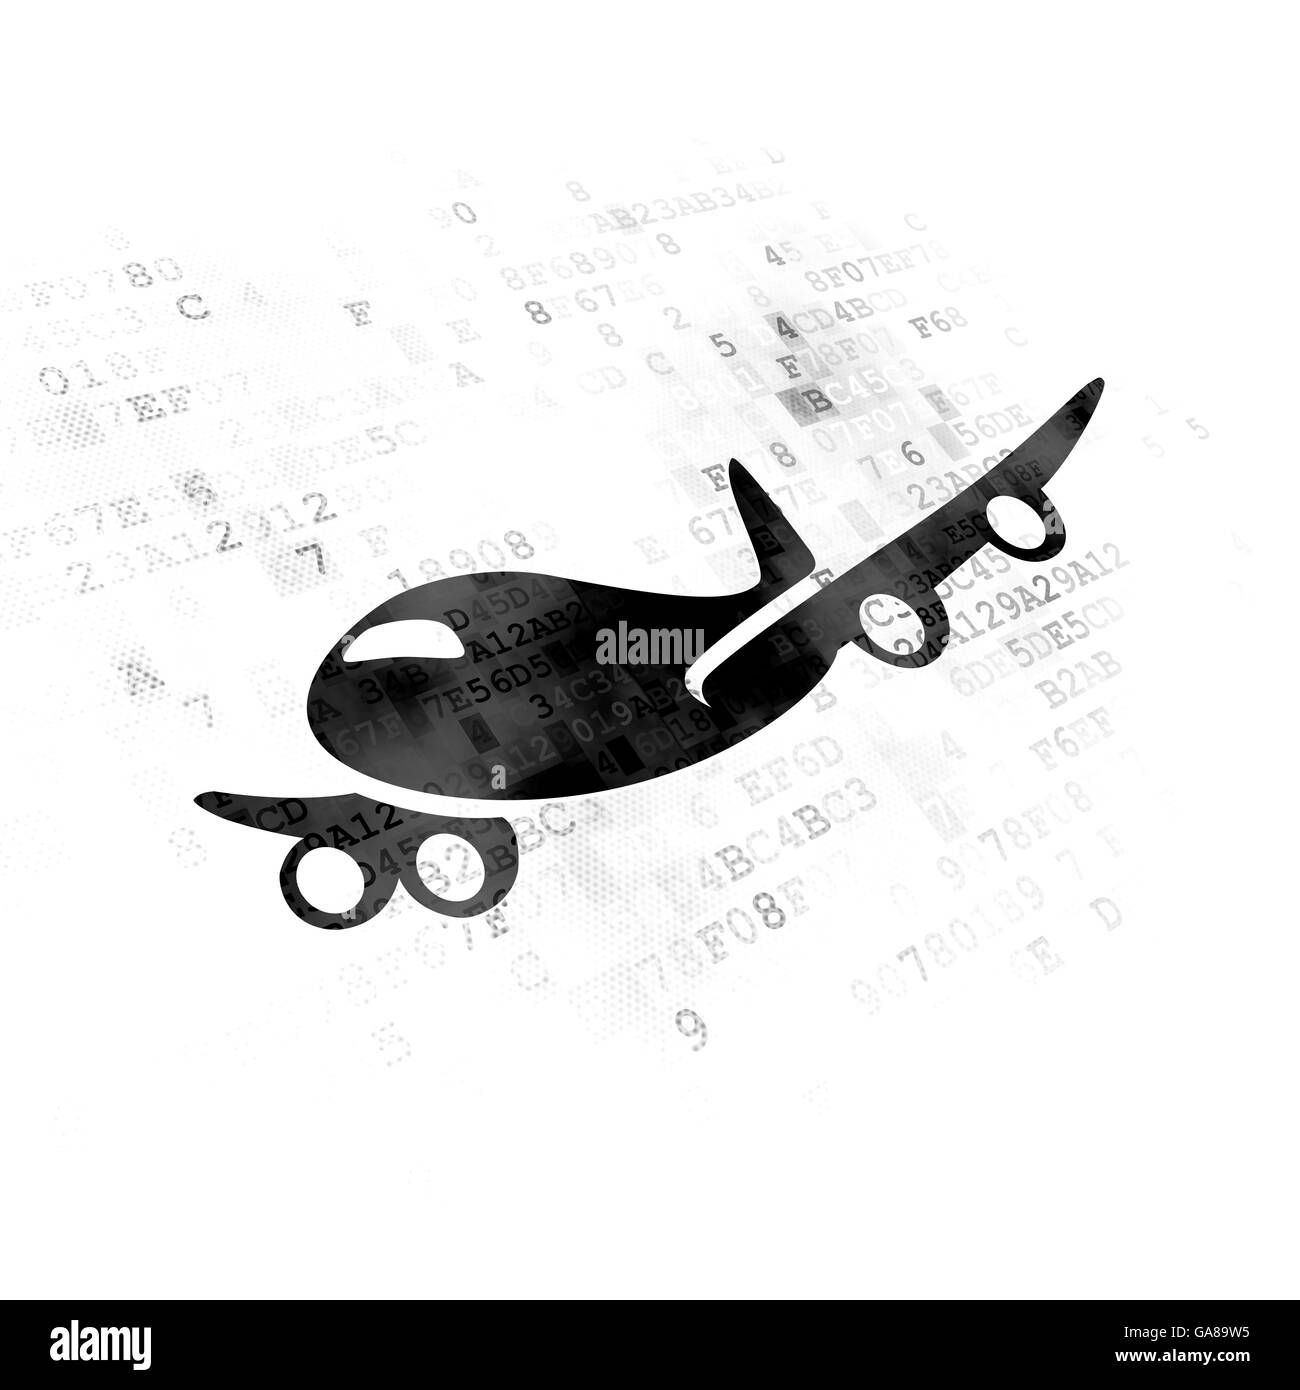 Tourism concept: Airplane on Digital background Stock Photo